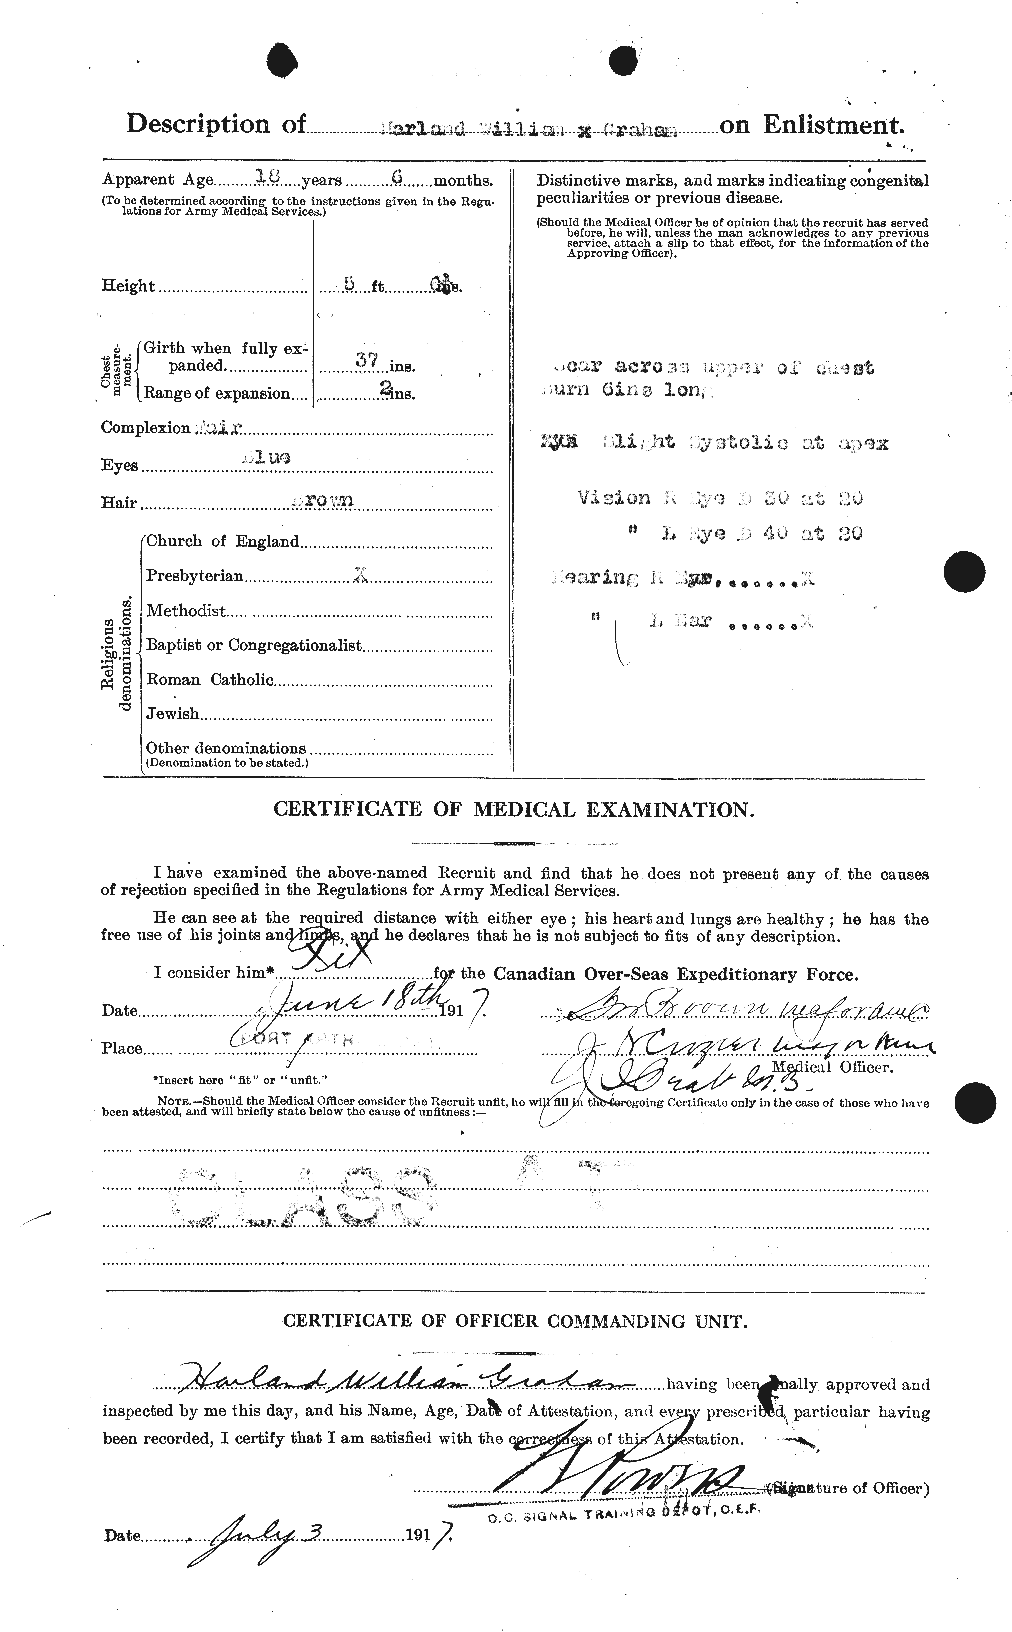 Personnel Records of the First World War - CEF 357692b